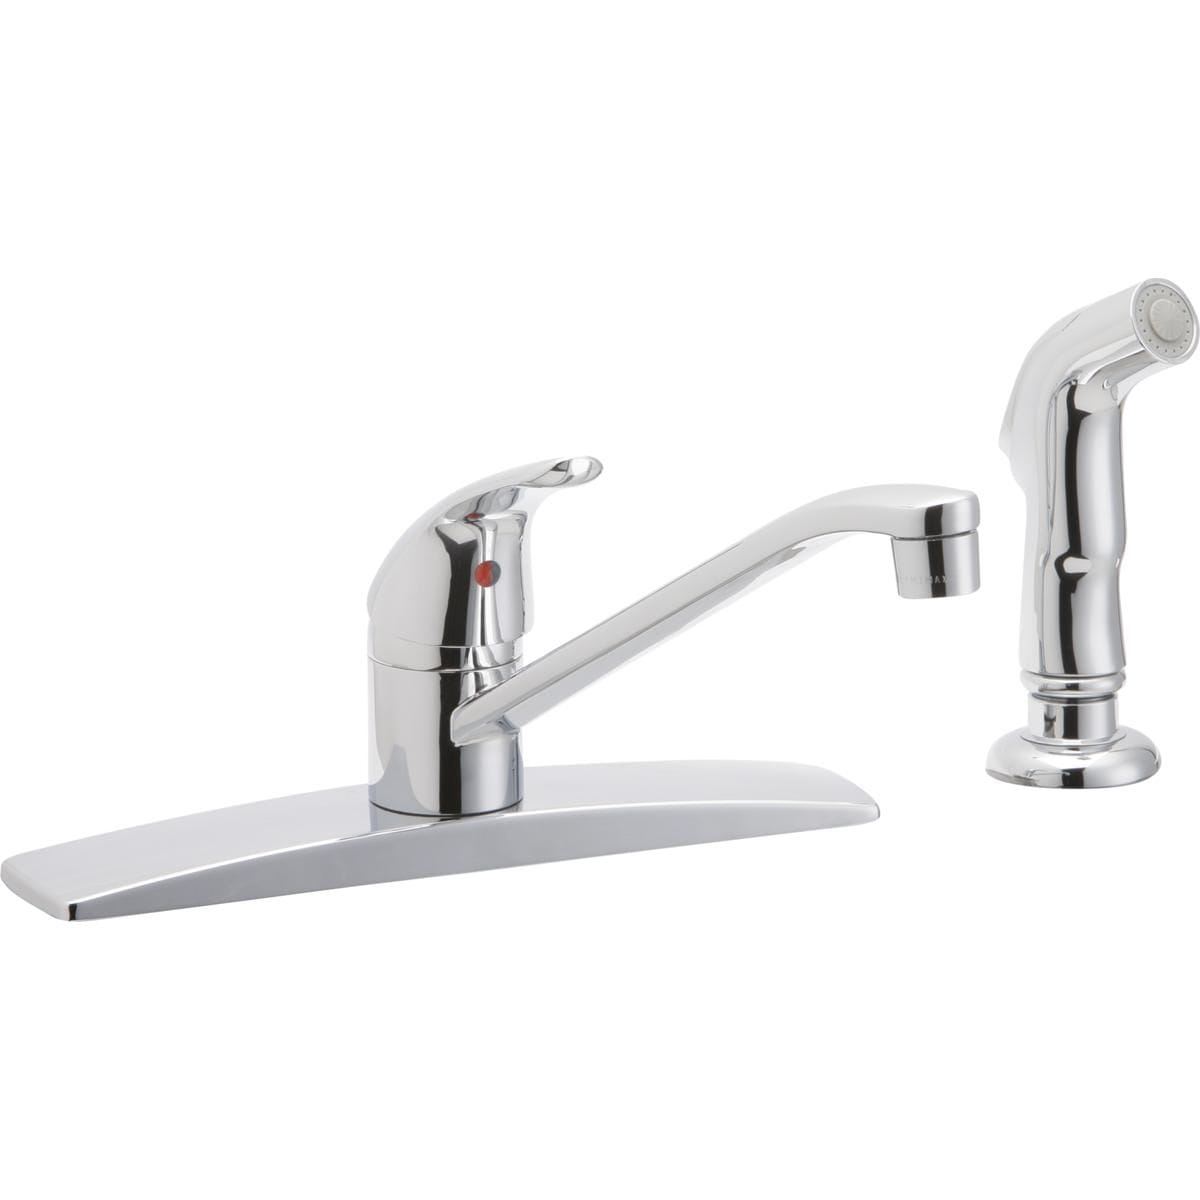 Elkay Lk2478cr Chrome Everyday 1 5 Gpm Standard Kitchen Faucet